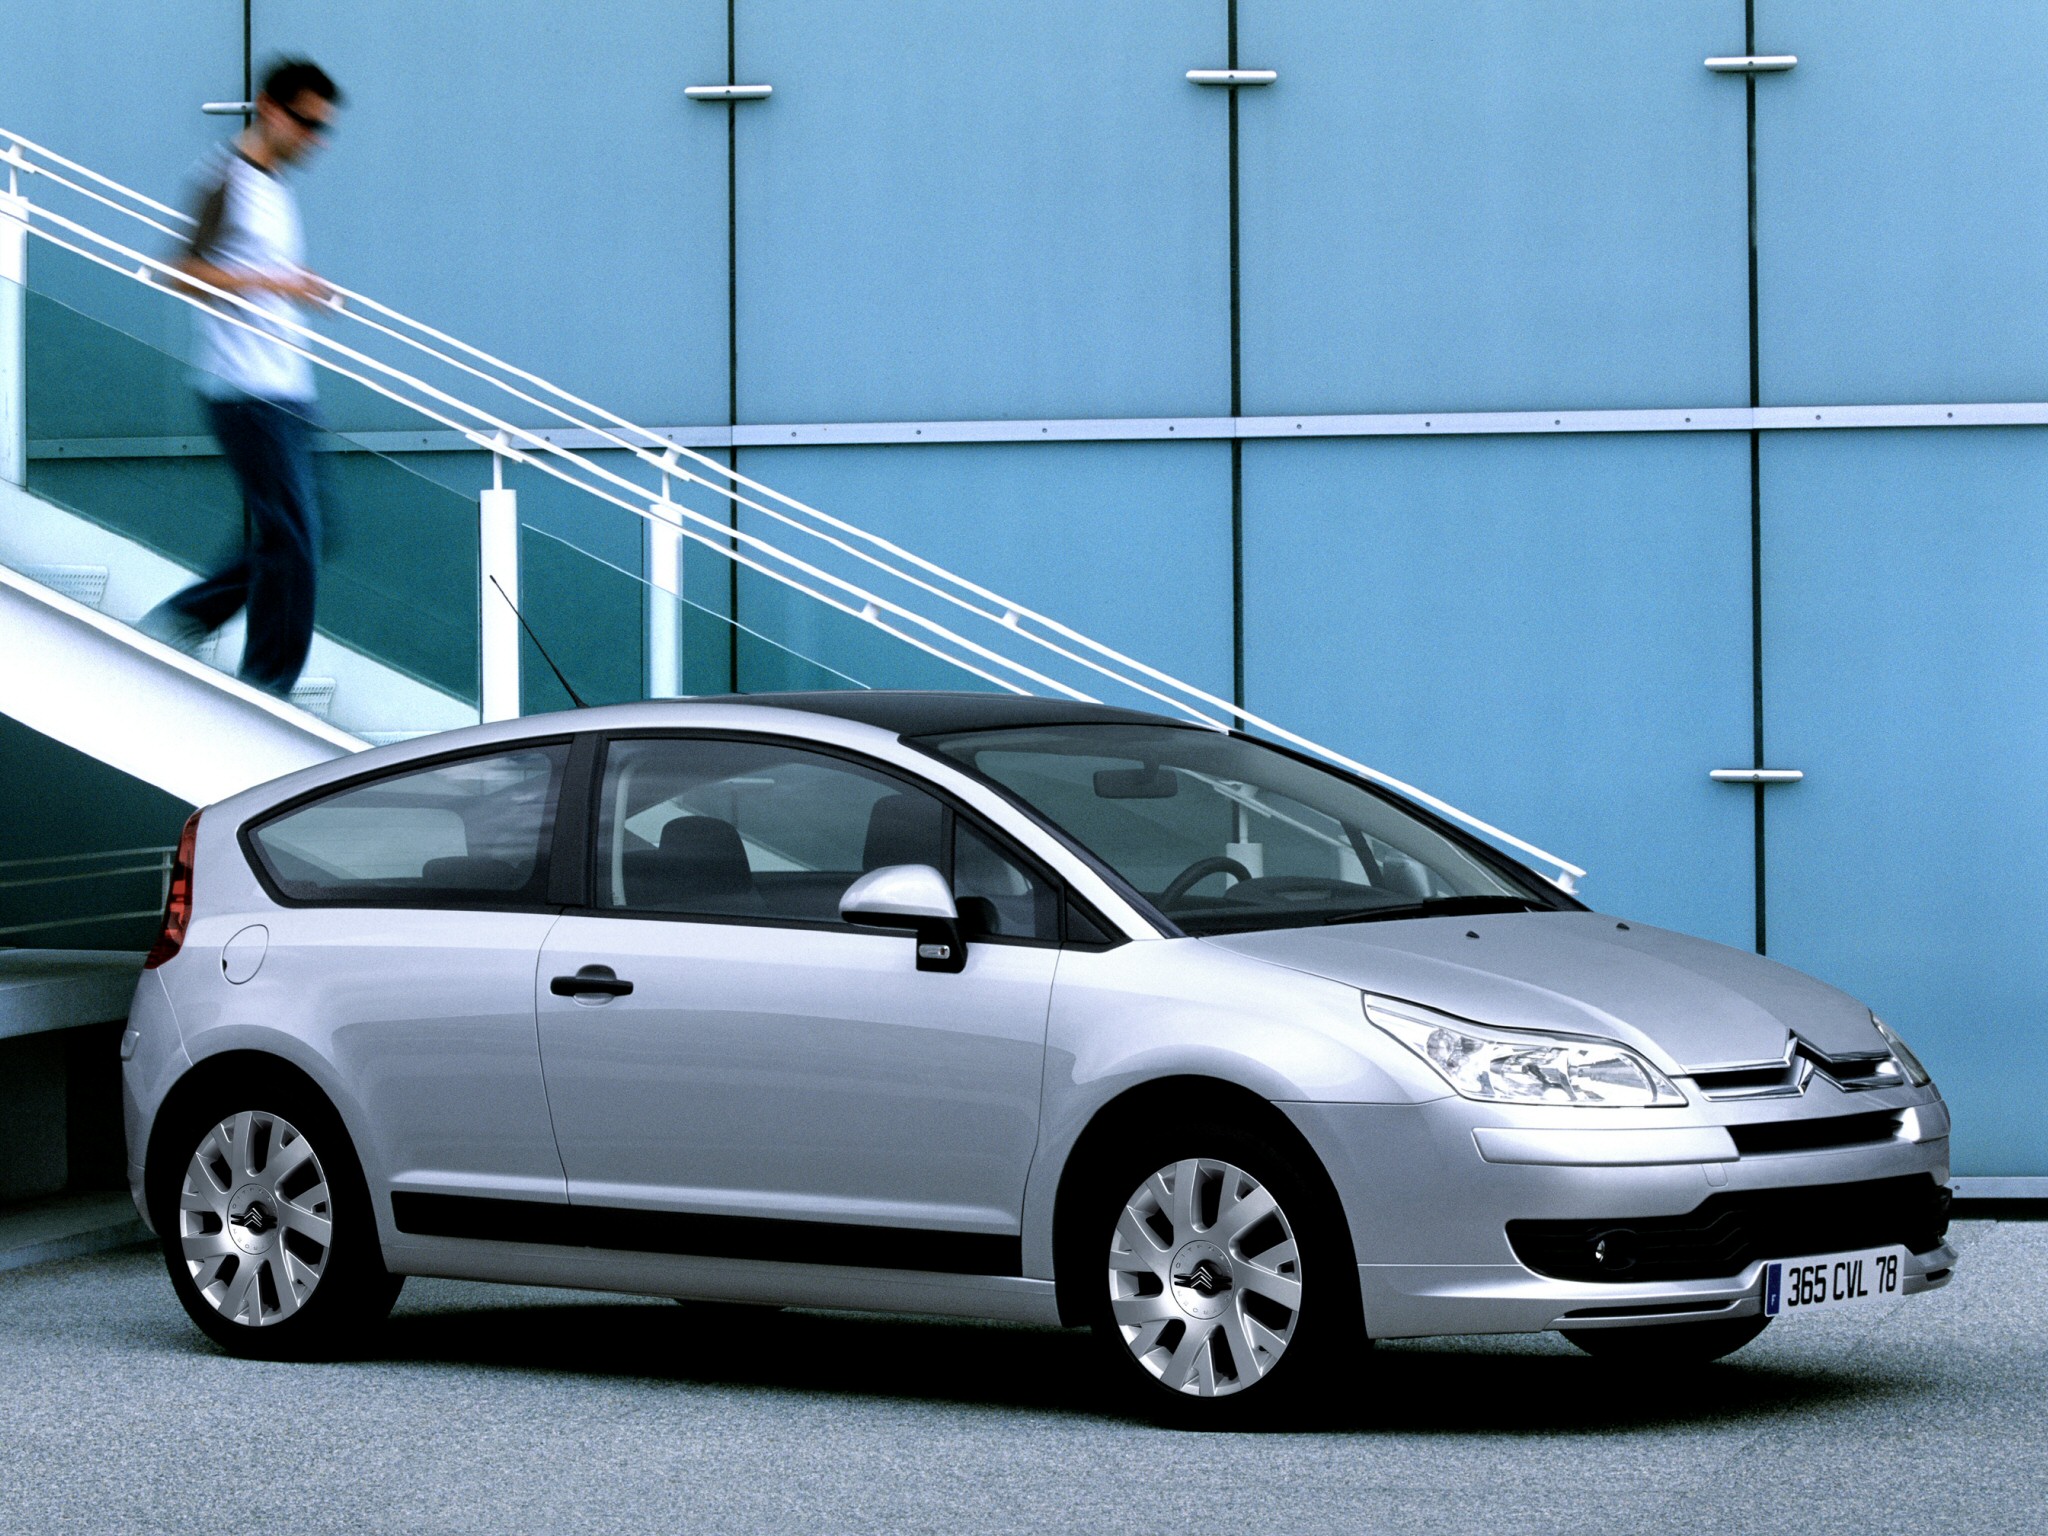 Car in pictures - car photo gallery " Citroen C4 Coupe 2005